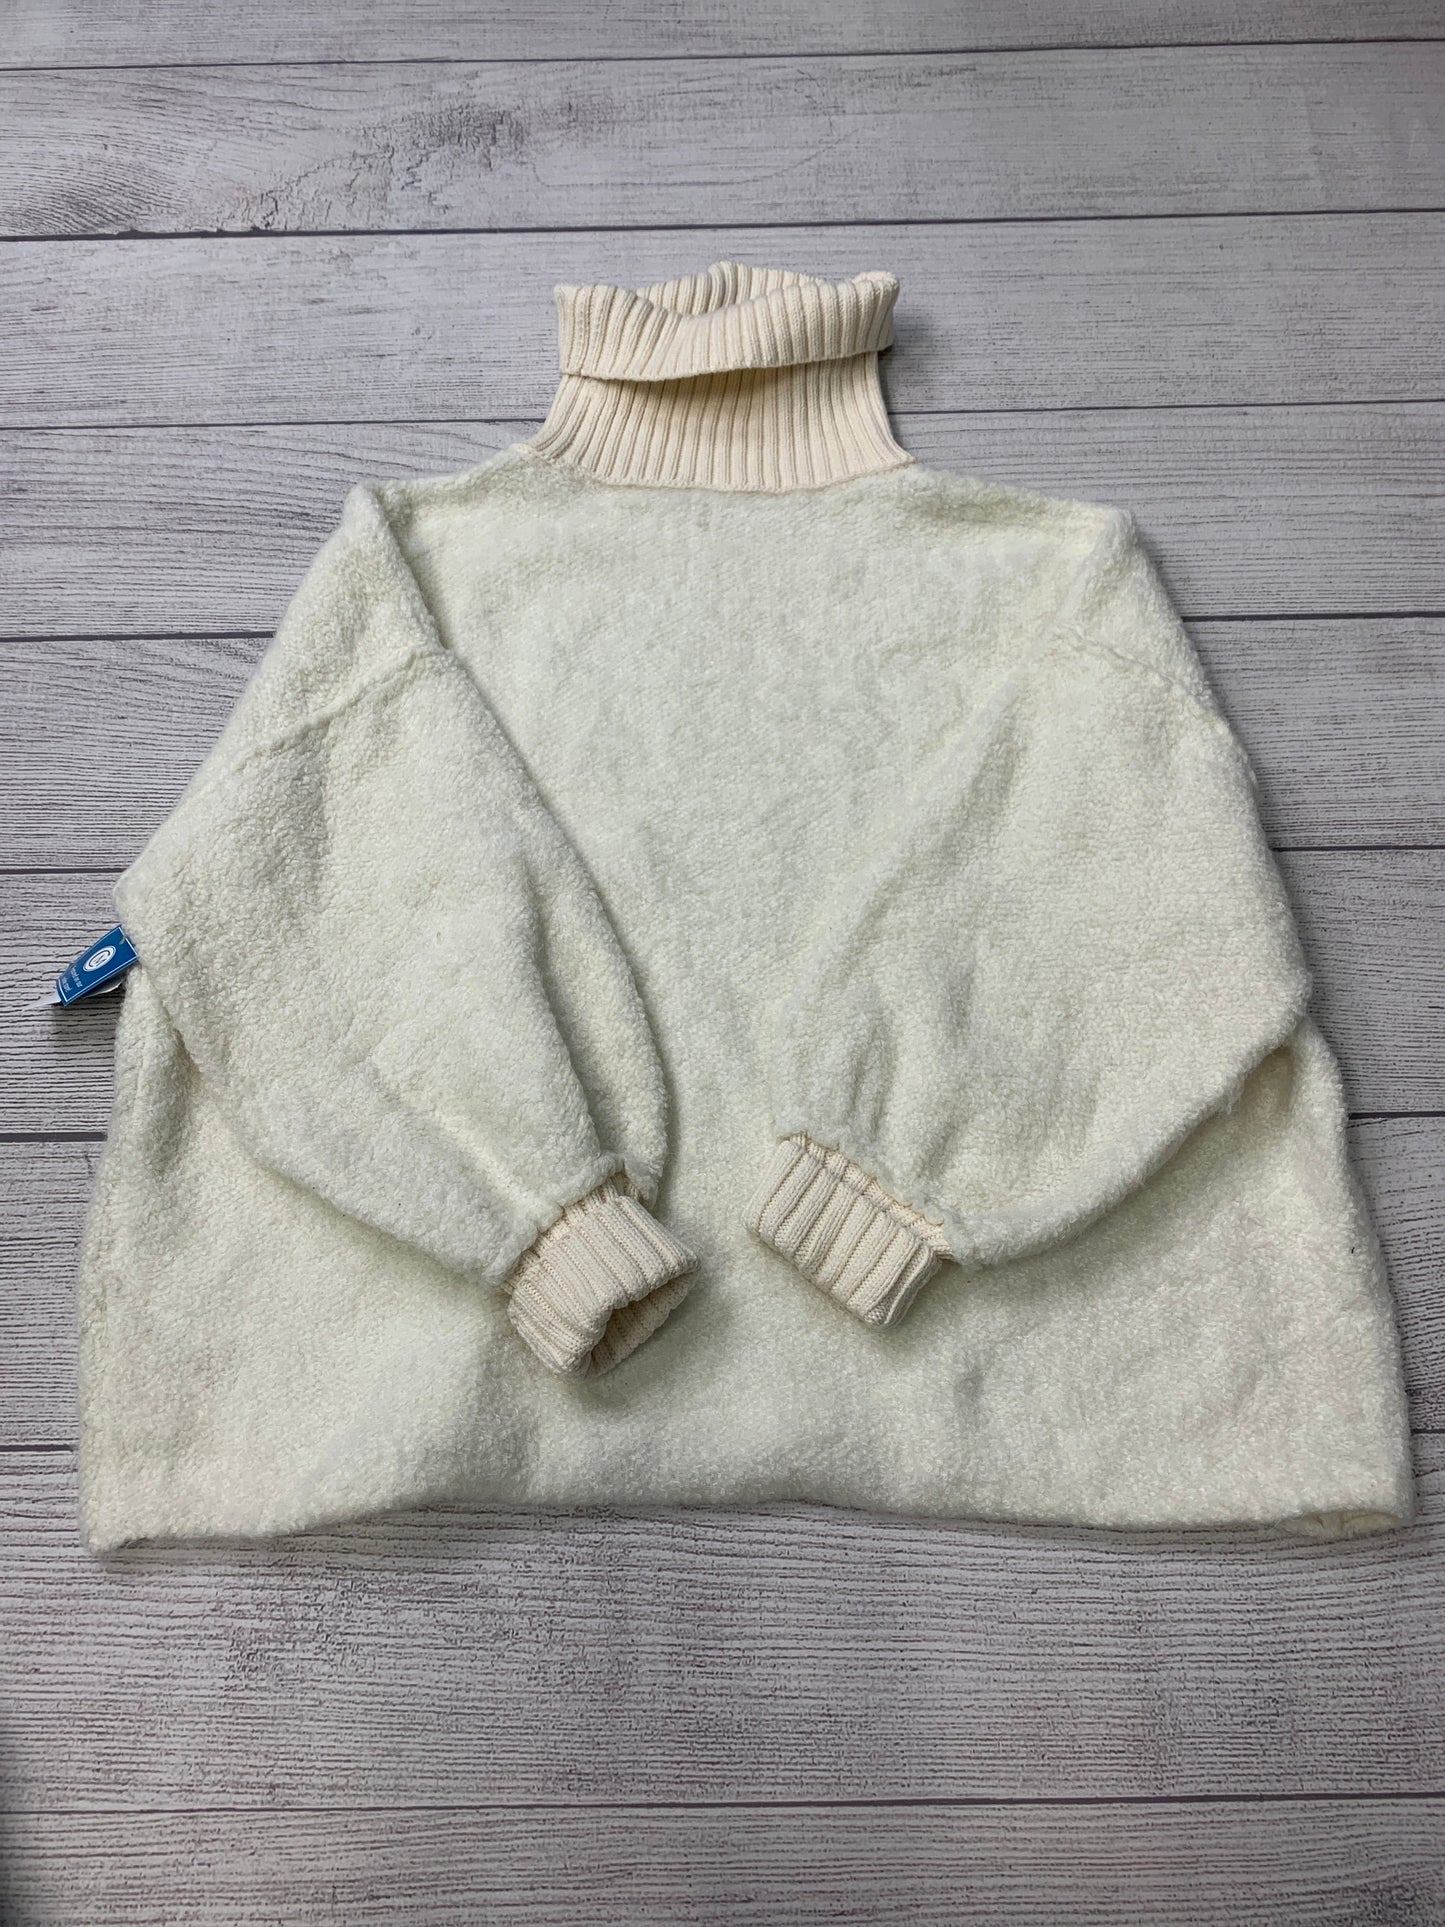 White Sweater Free People, Size S